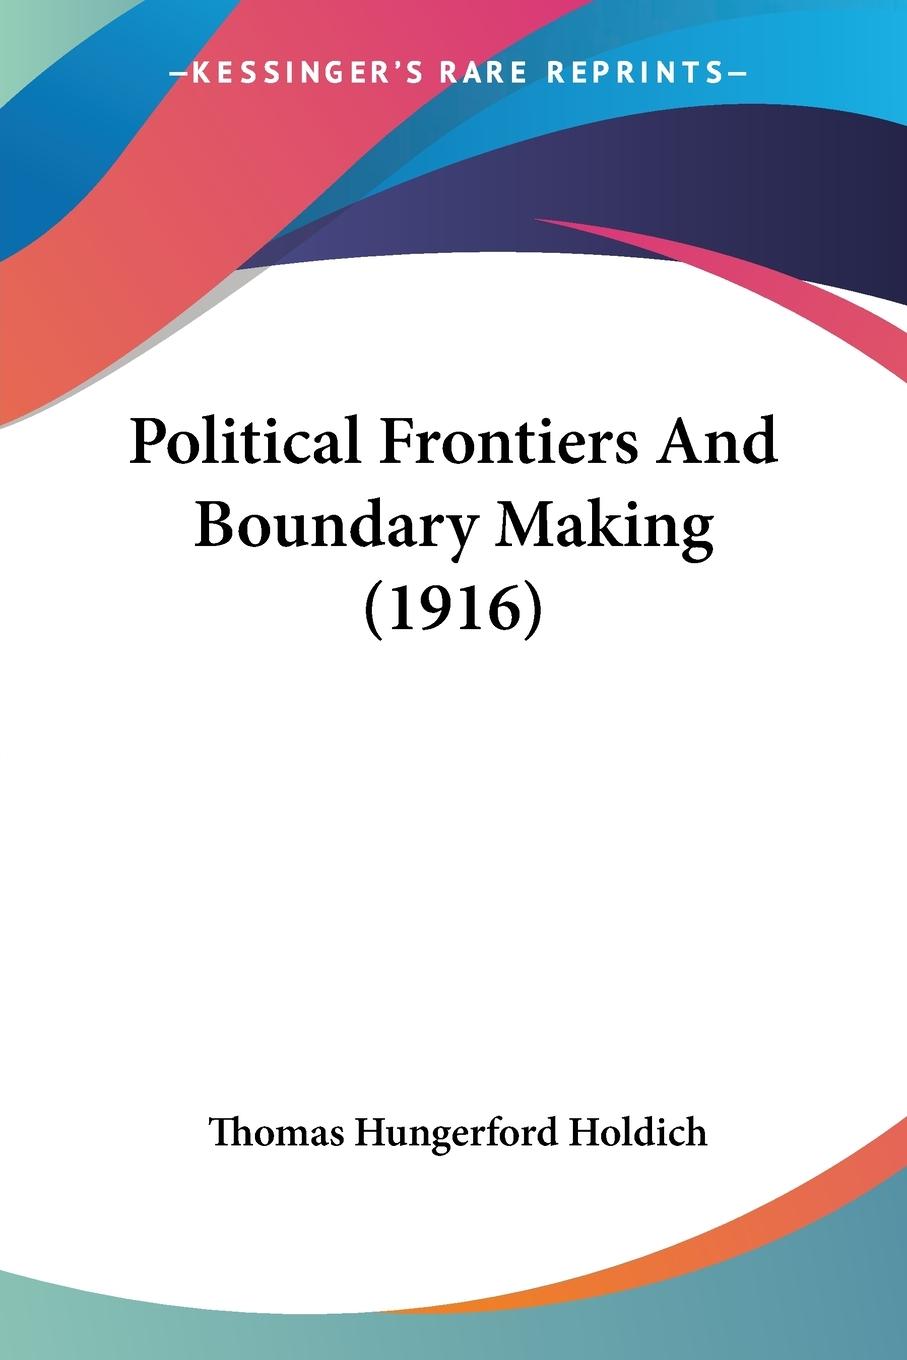 Political Frontiers And Boundary Making (1916) - Holdich, Thomas Hungerford